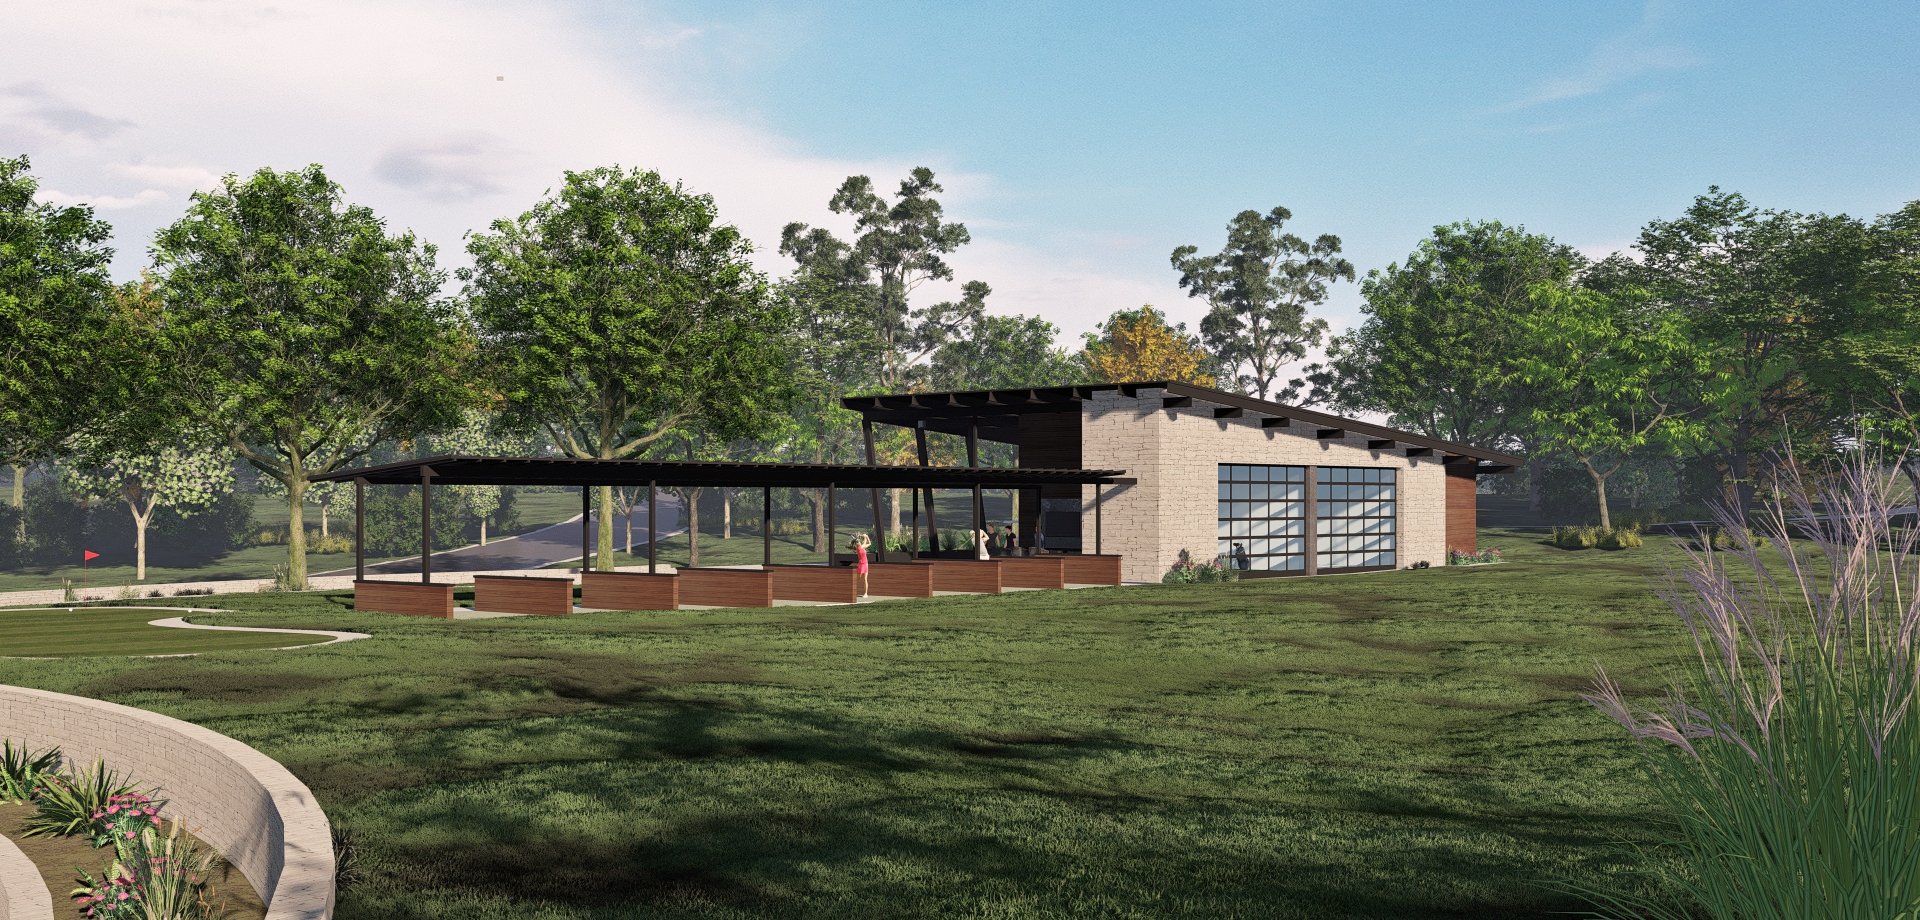 A rendering of a building called the golf academy for golf lessons and more.